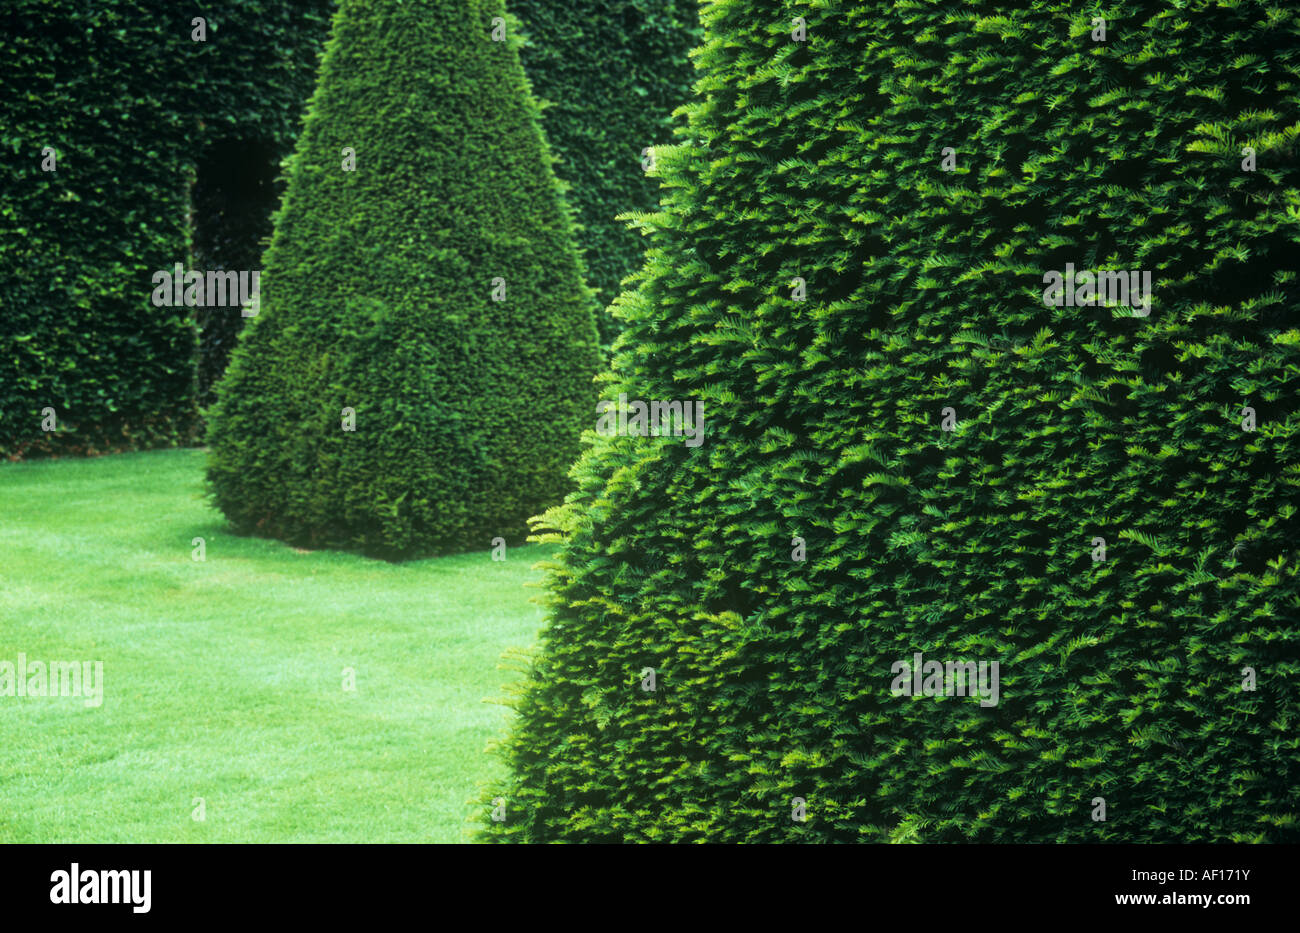 Bushes of Yew or Taxus media Hicksii clipped into tall pyramids on lawn with high Common beech hedge with doorway beyond Stock Photo